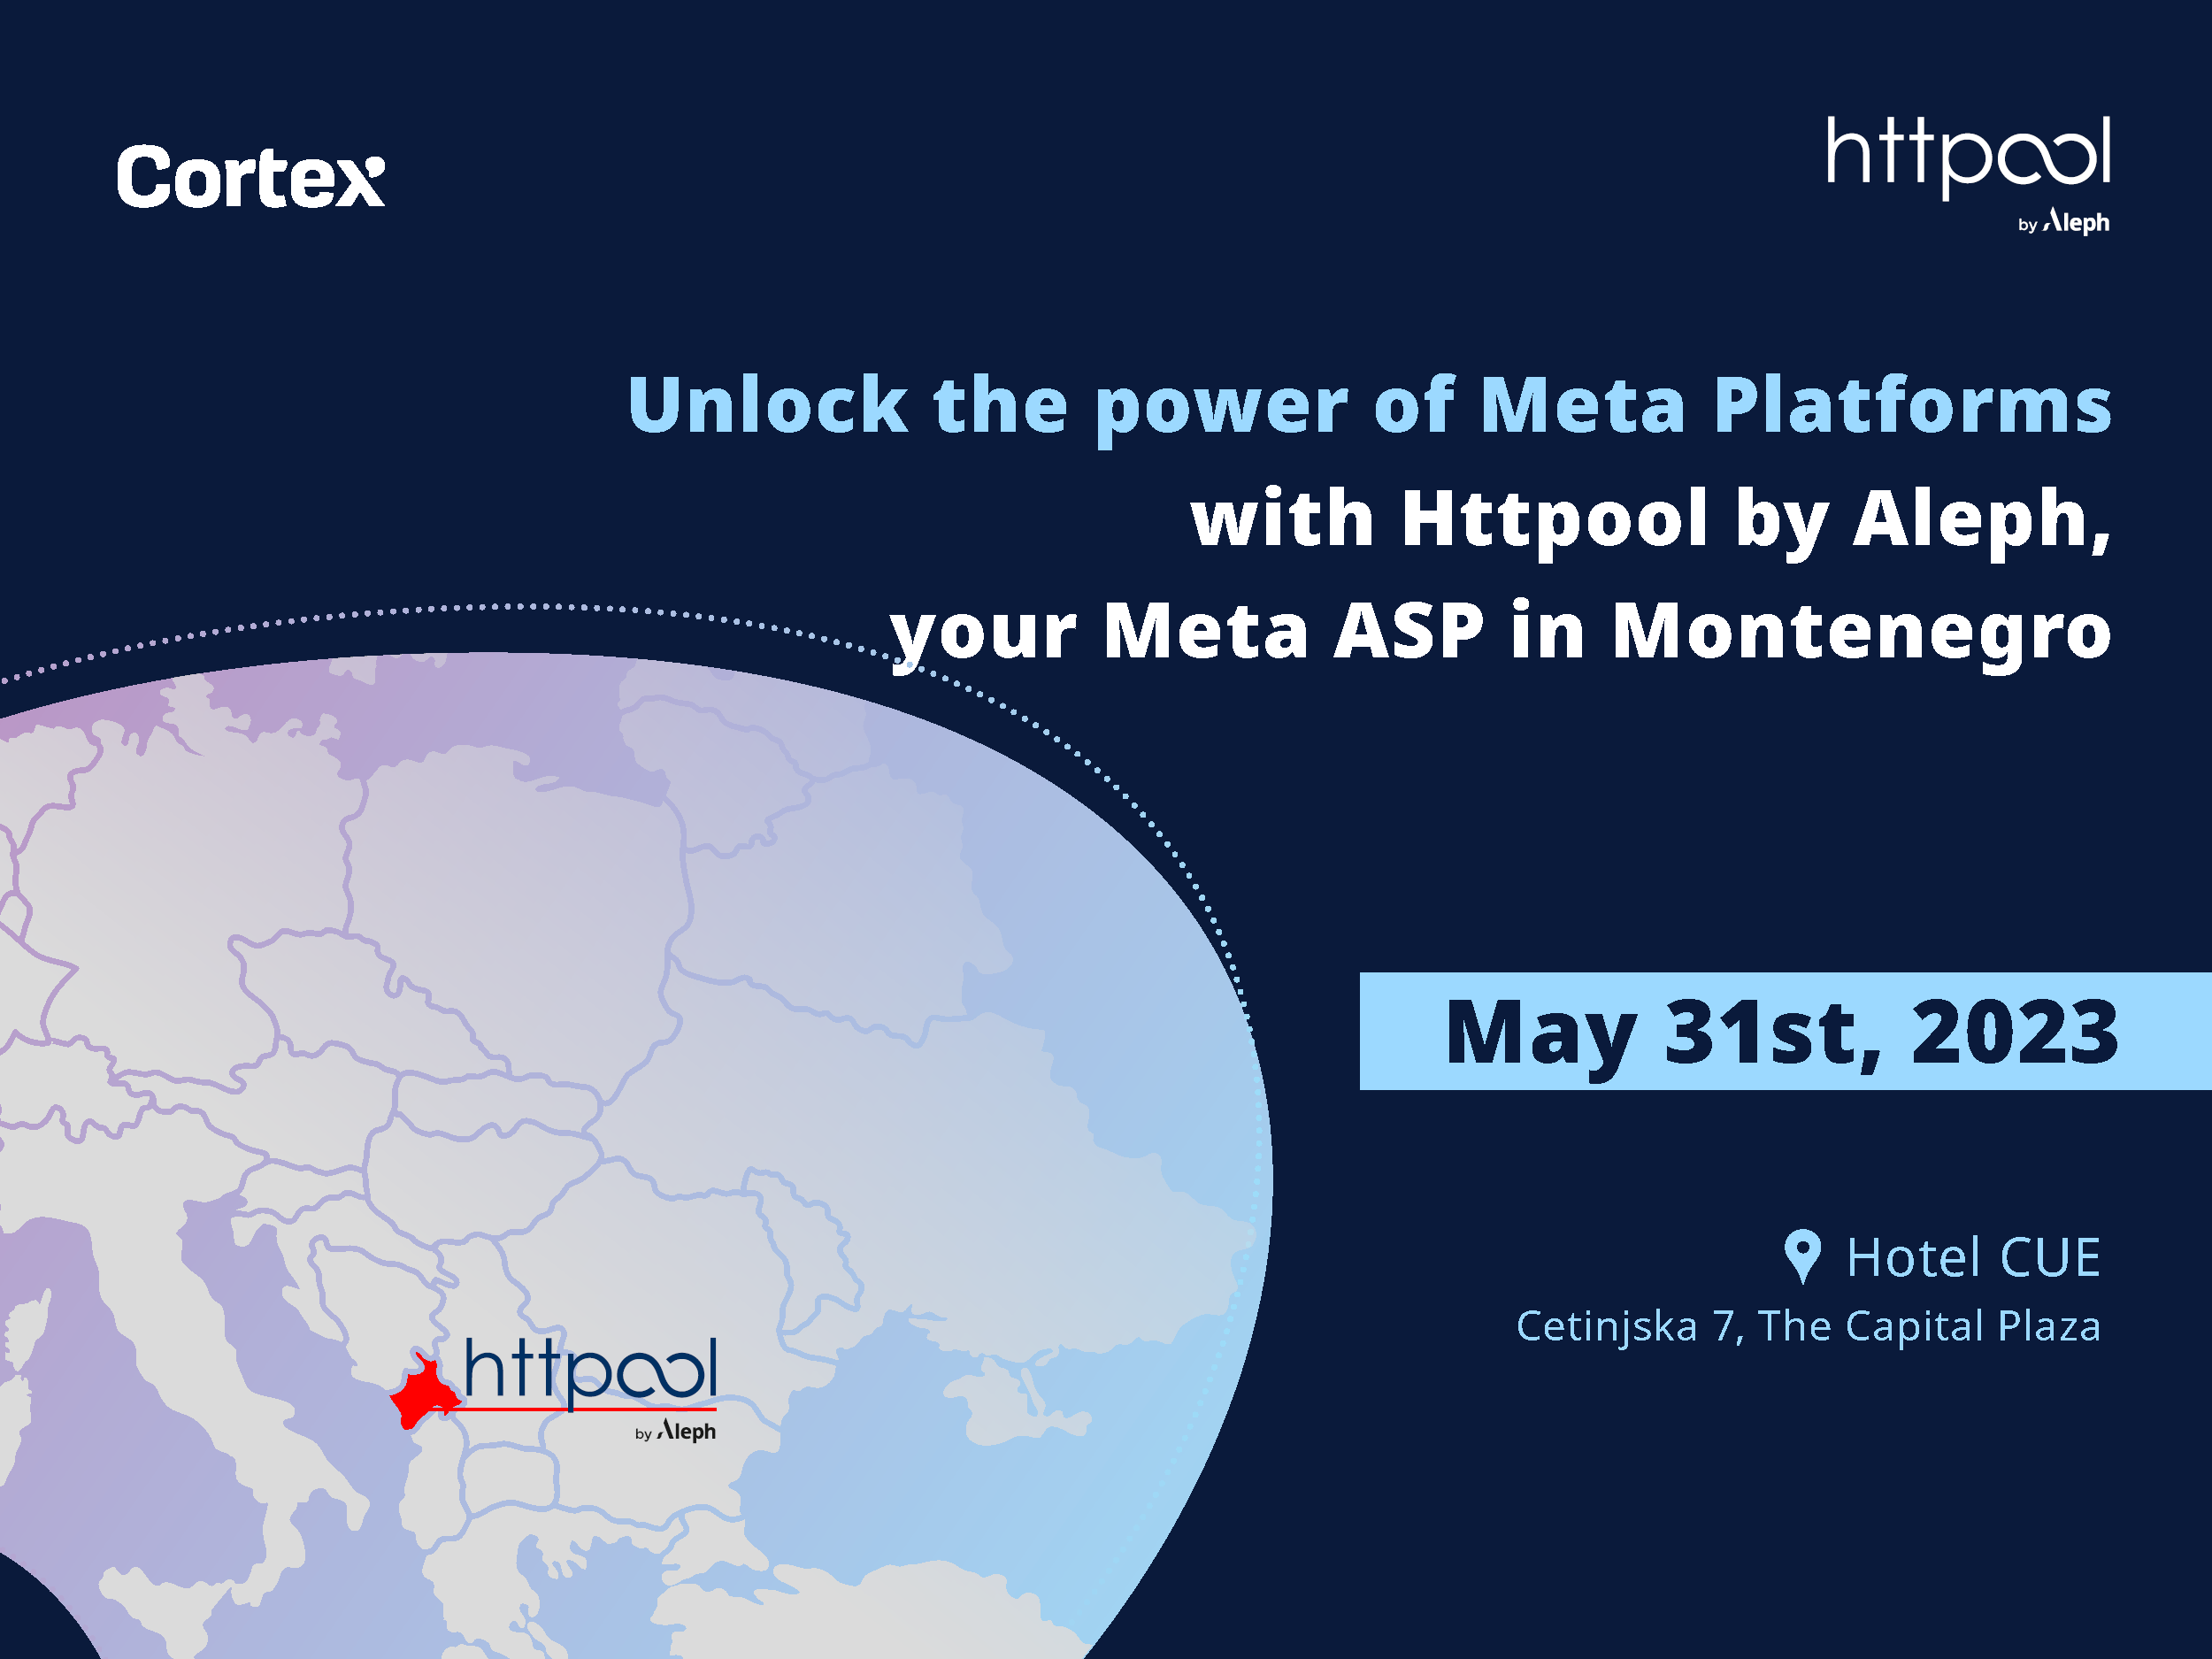 Unlock the power of Meta Platforms with Httpool by Aleph, your Meta ASP in Montenegro